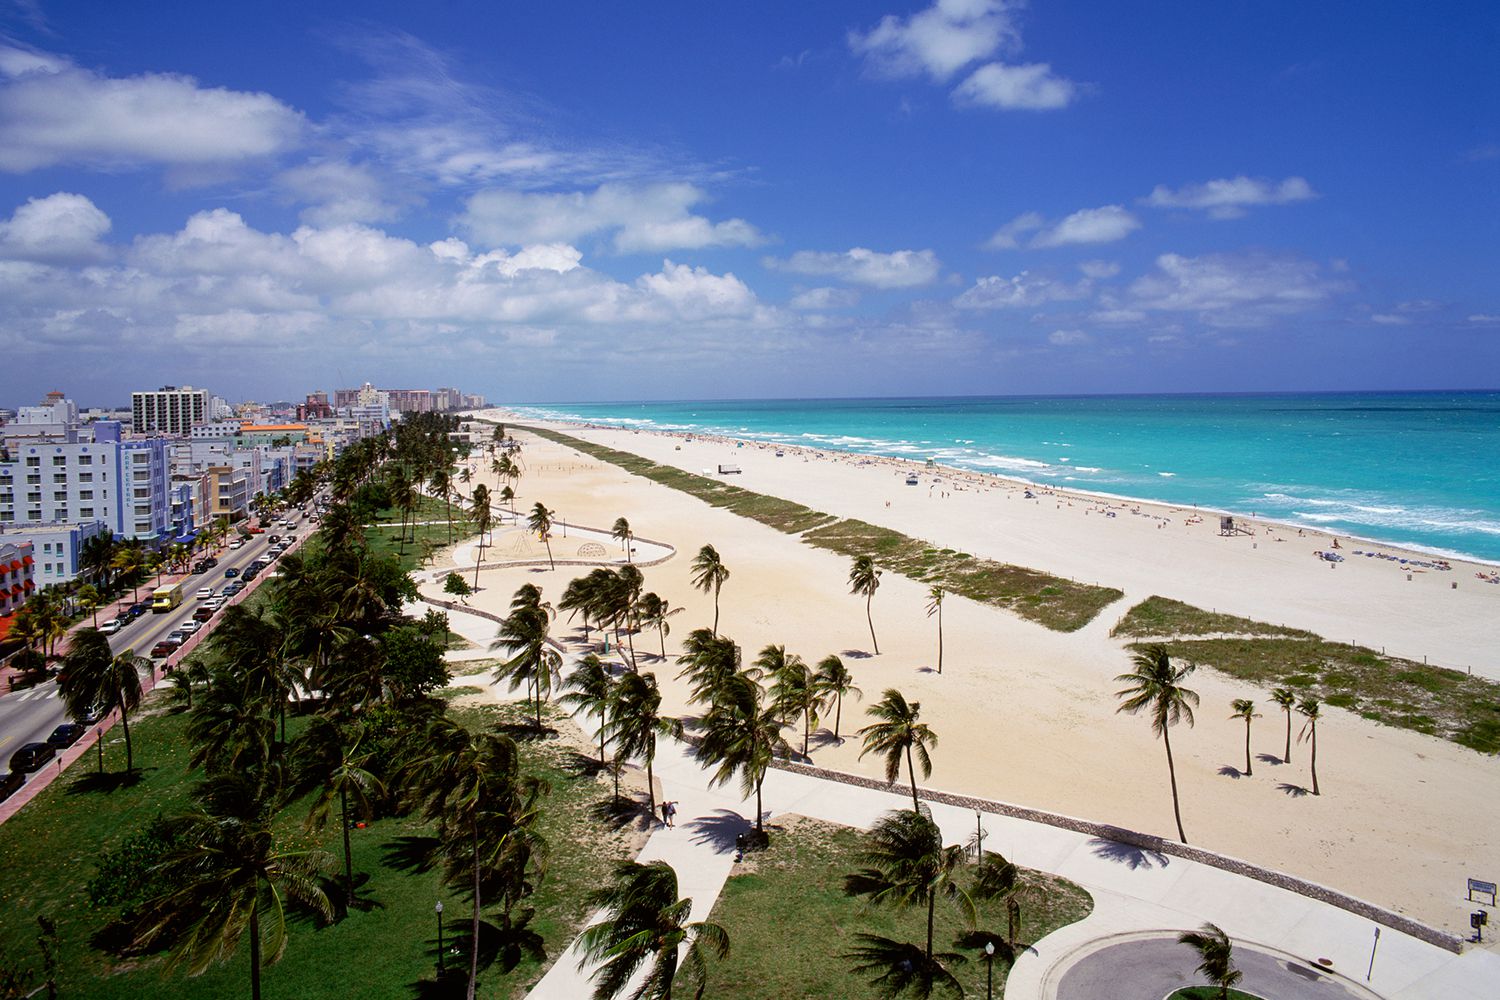 Top 10 Things To Do in Miami